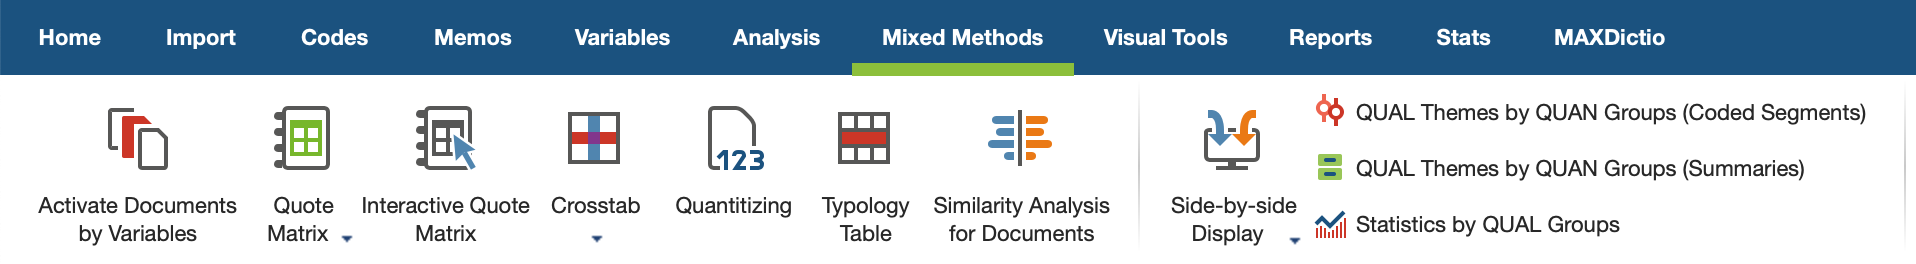 The “Mixed Methods” Tab